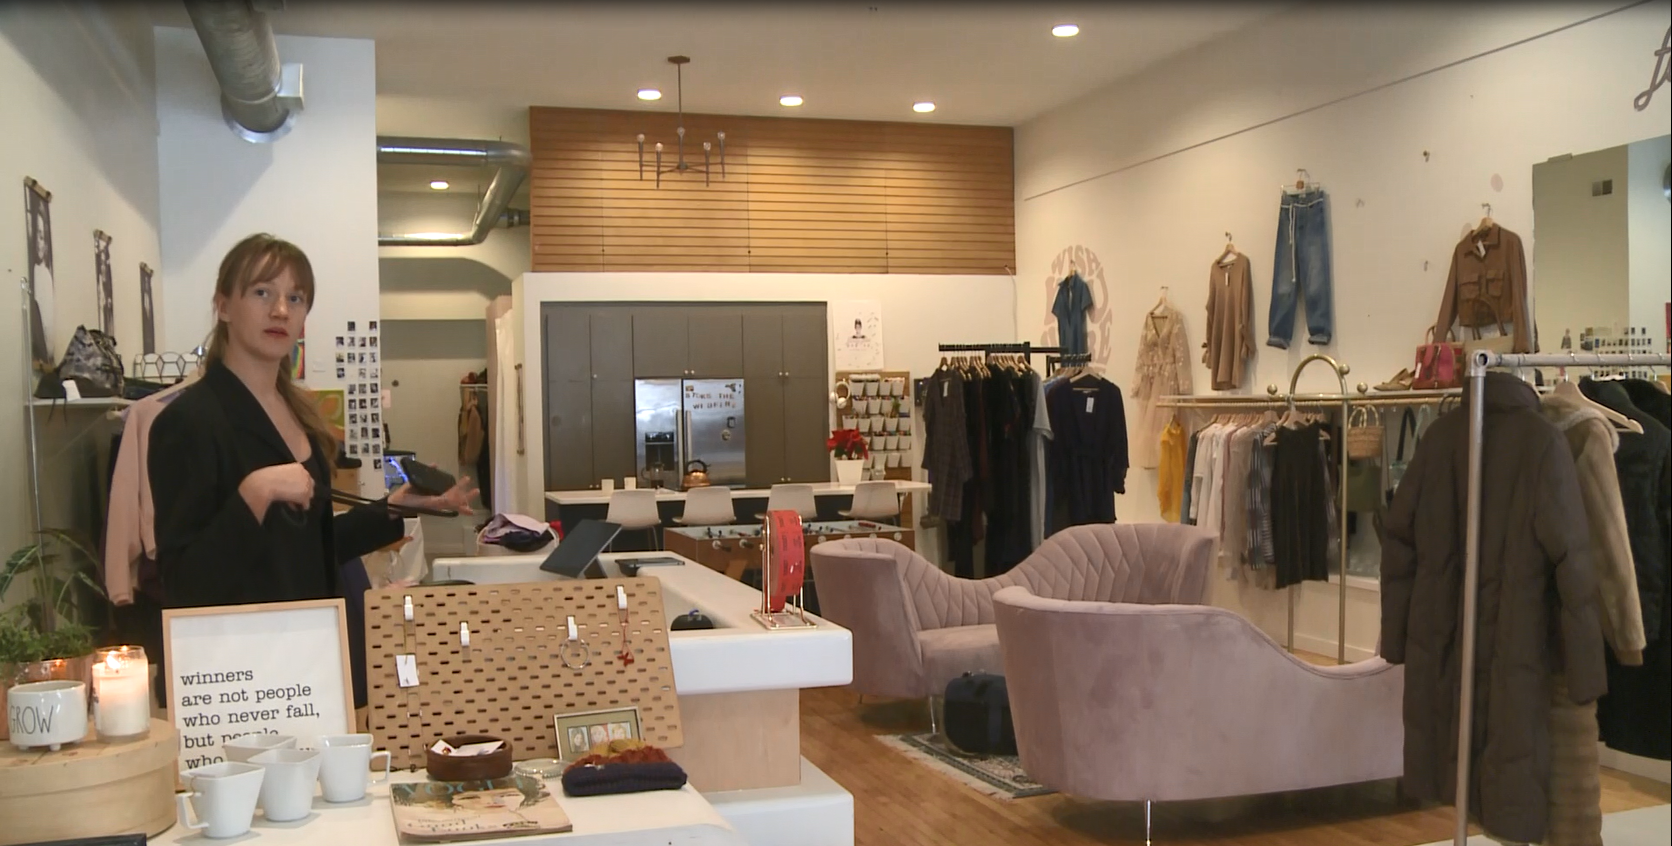 Free People to open first West Michigan store 